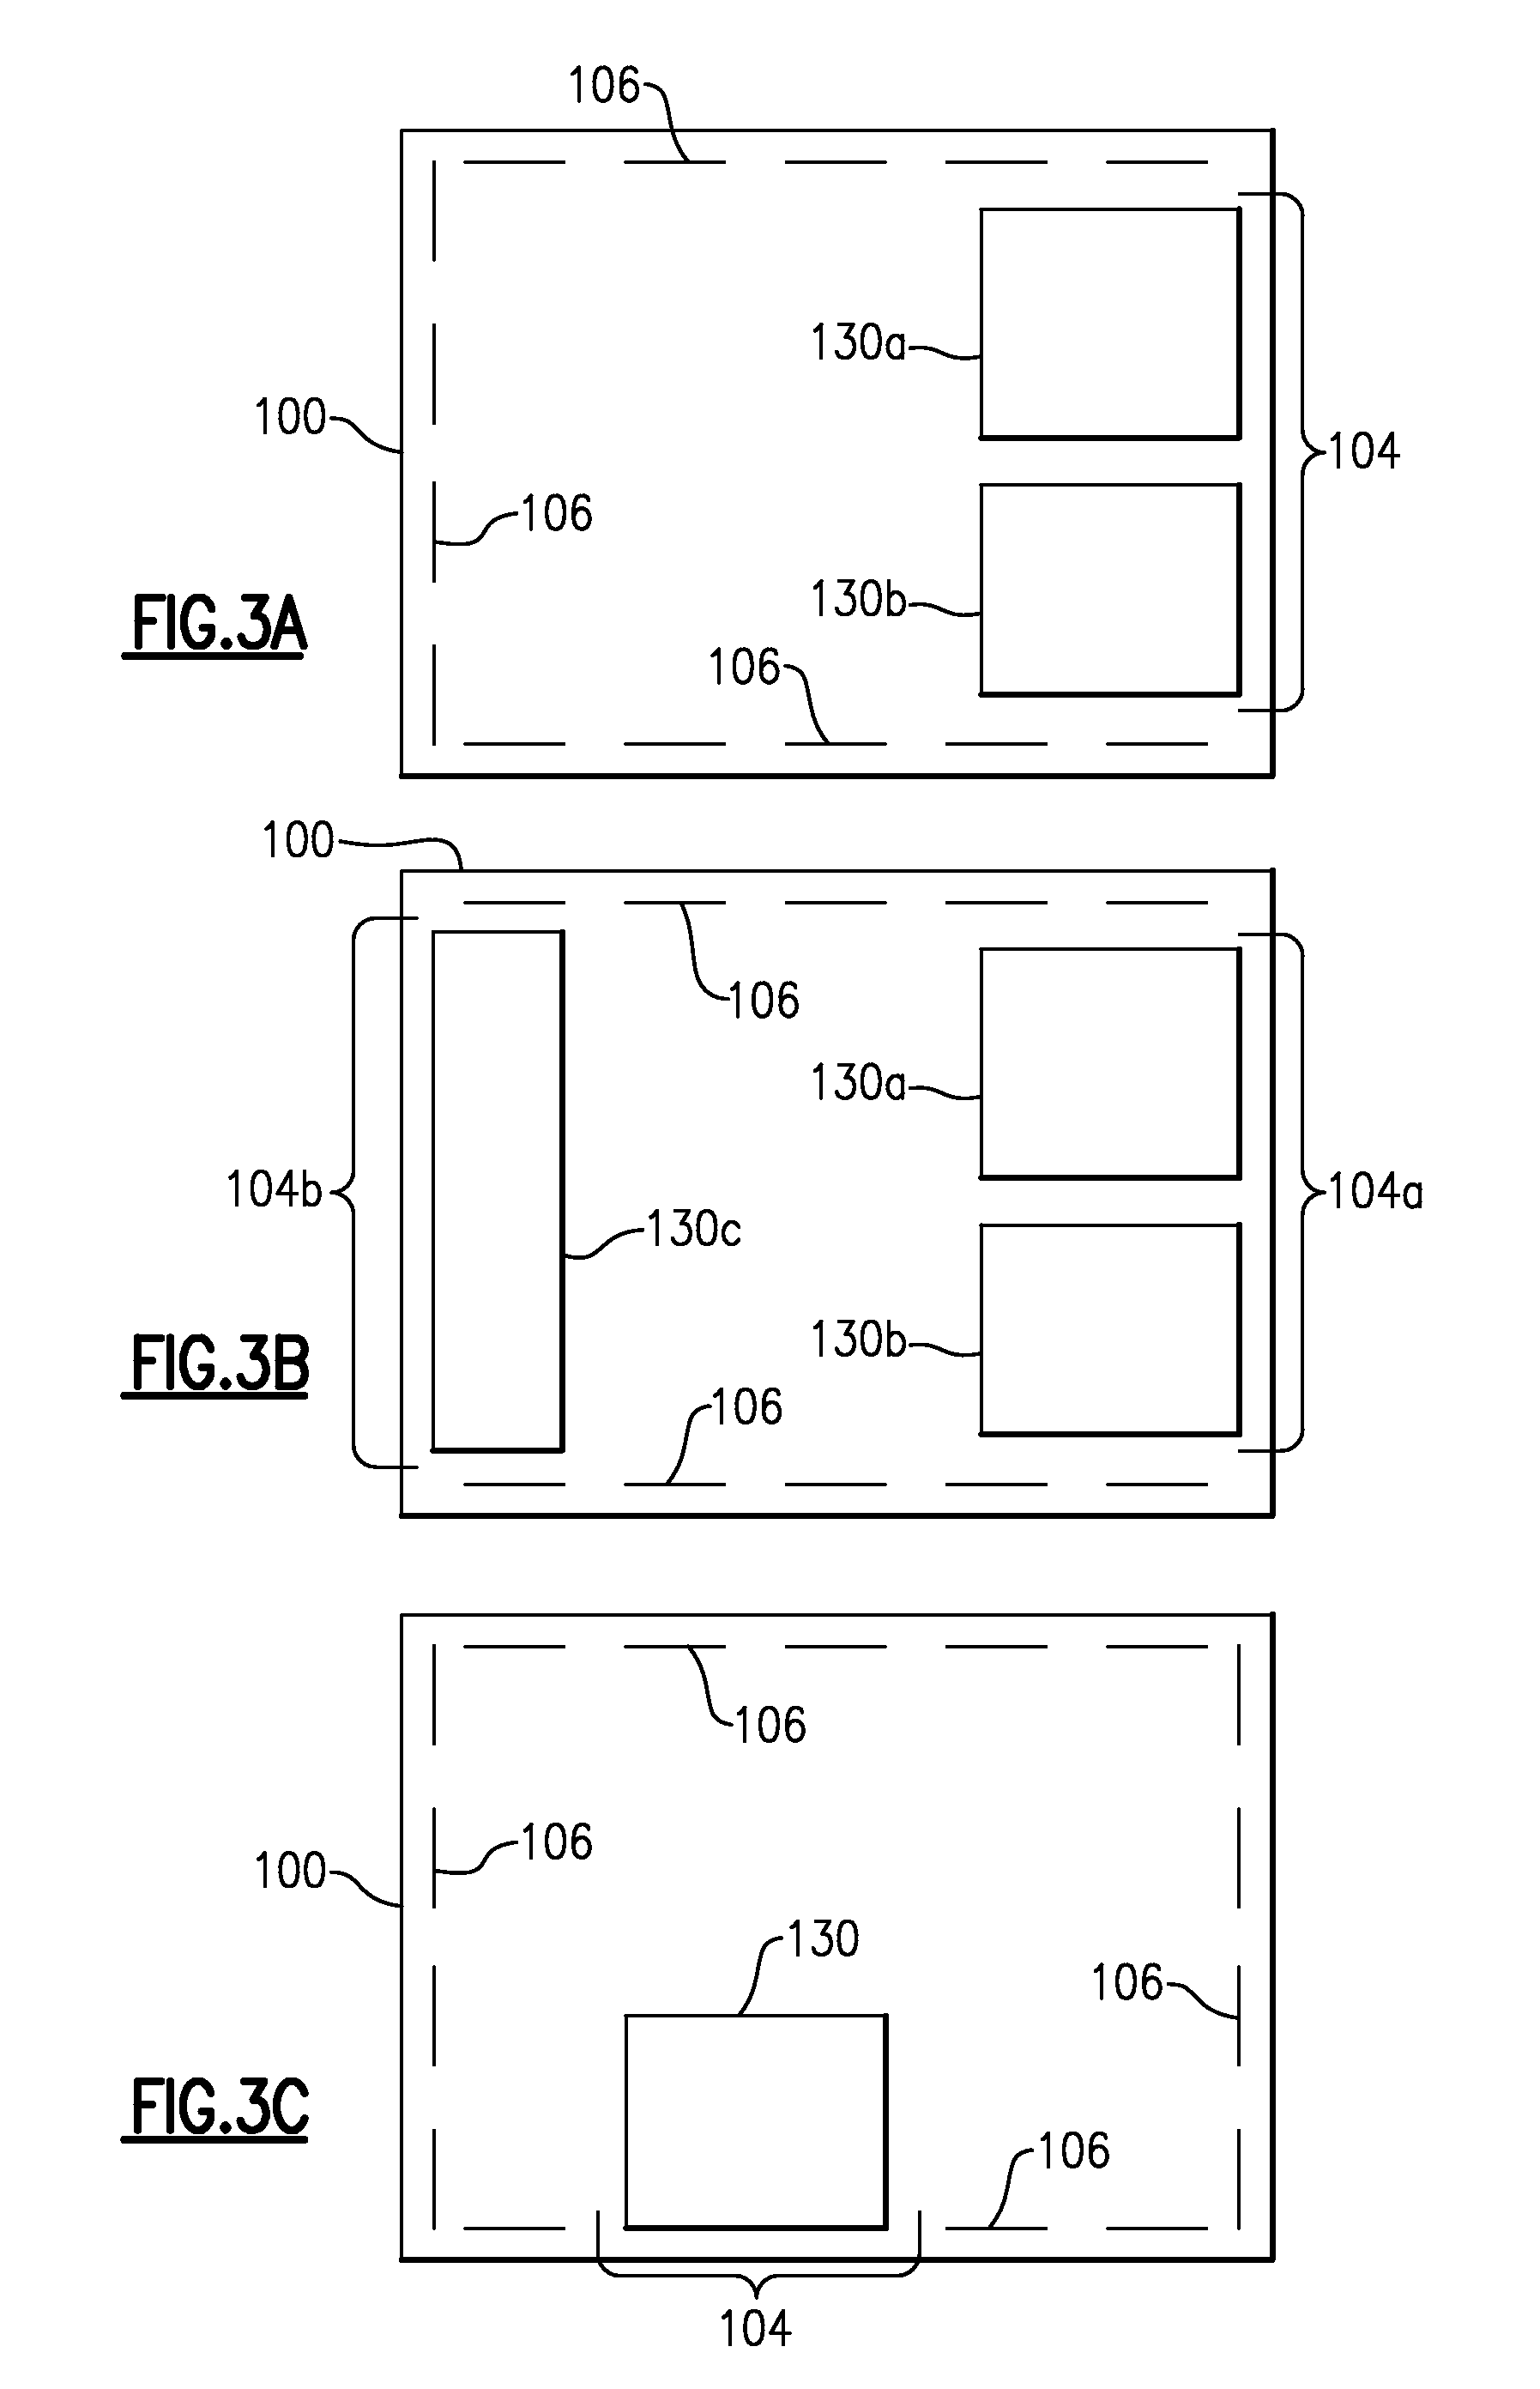 Apparatus and methods related to conformal coating implemented with surface mount devices